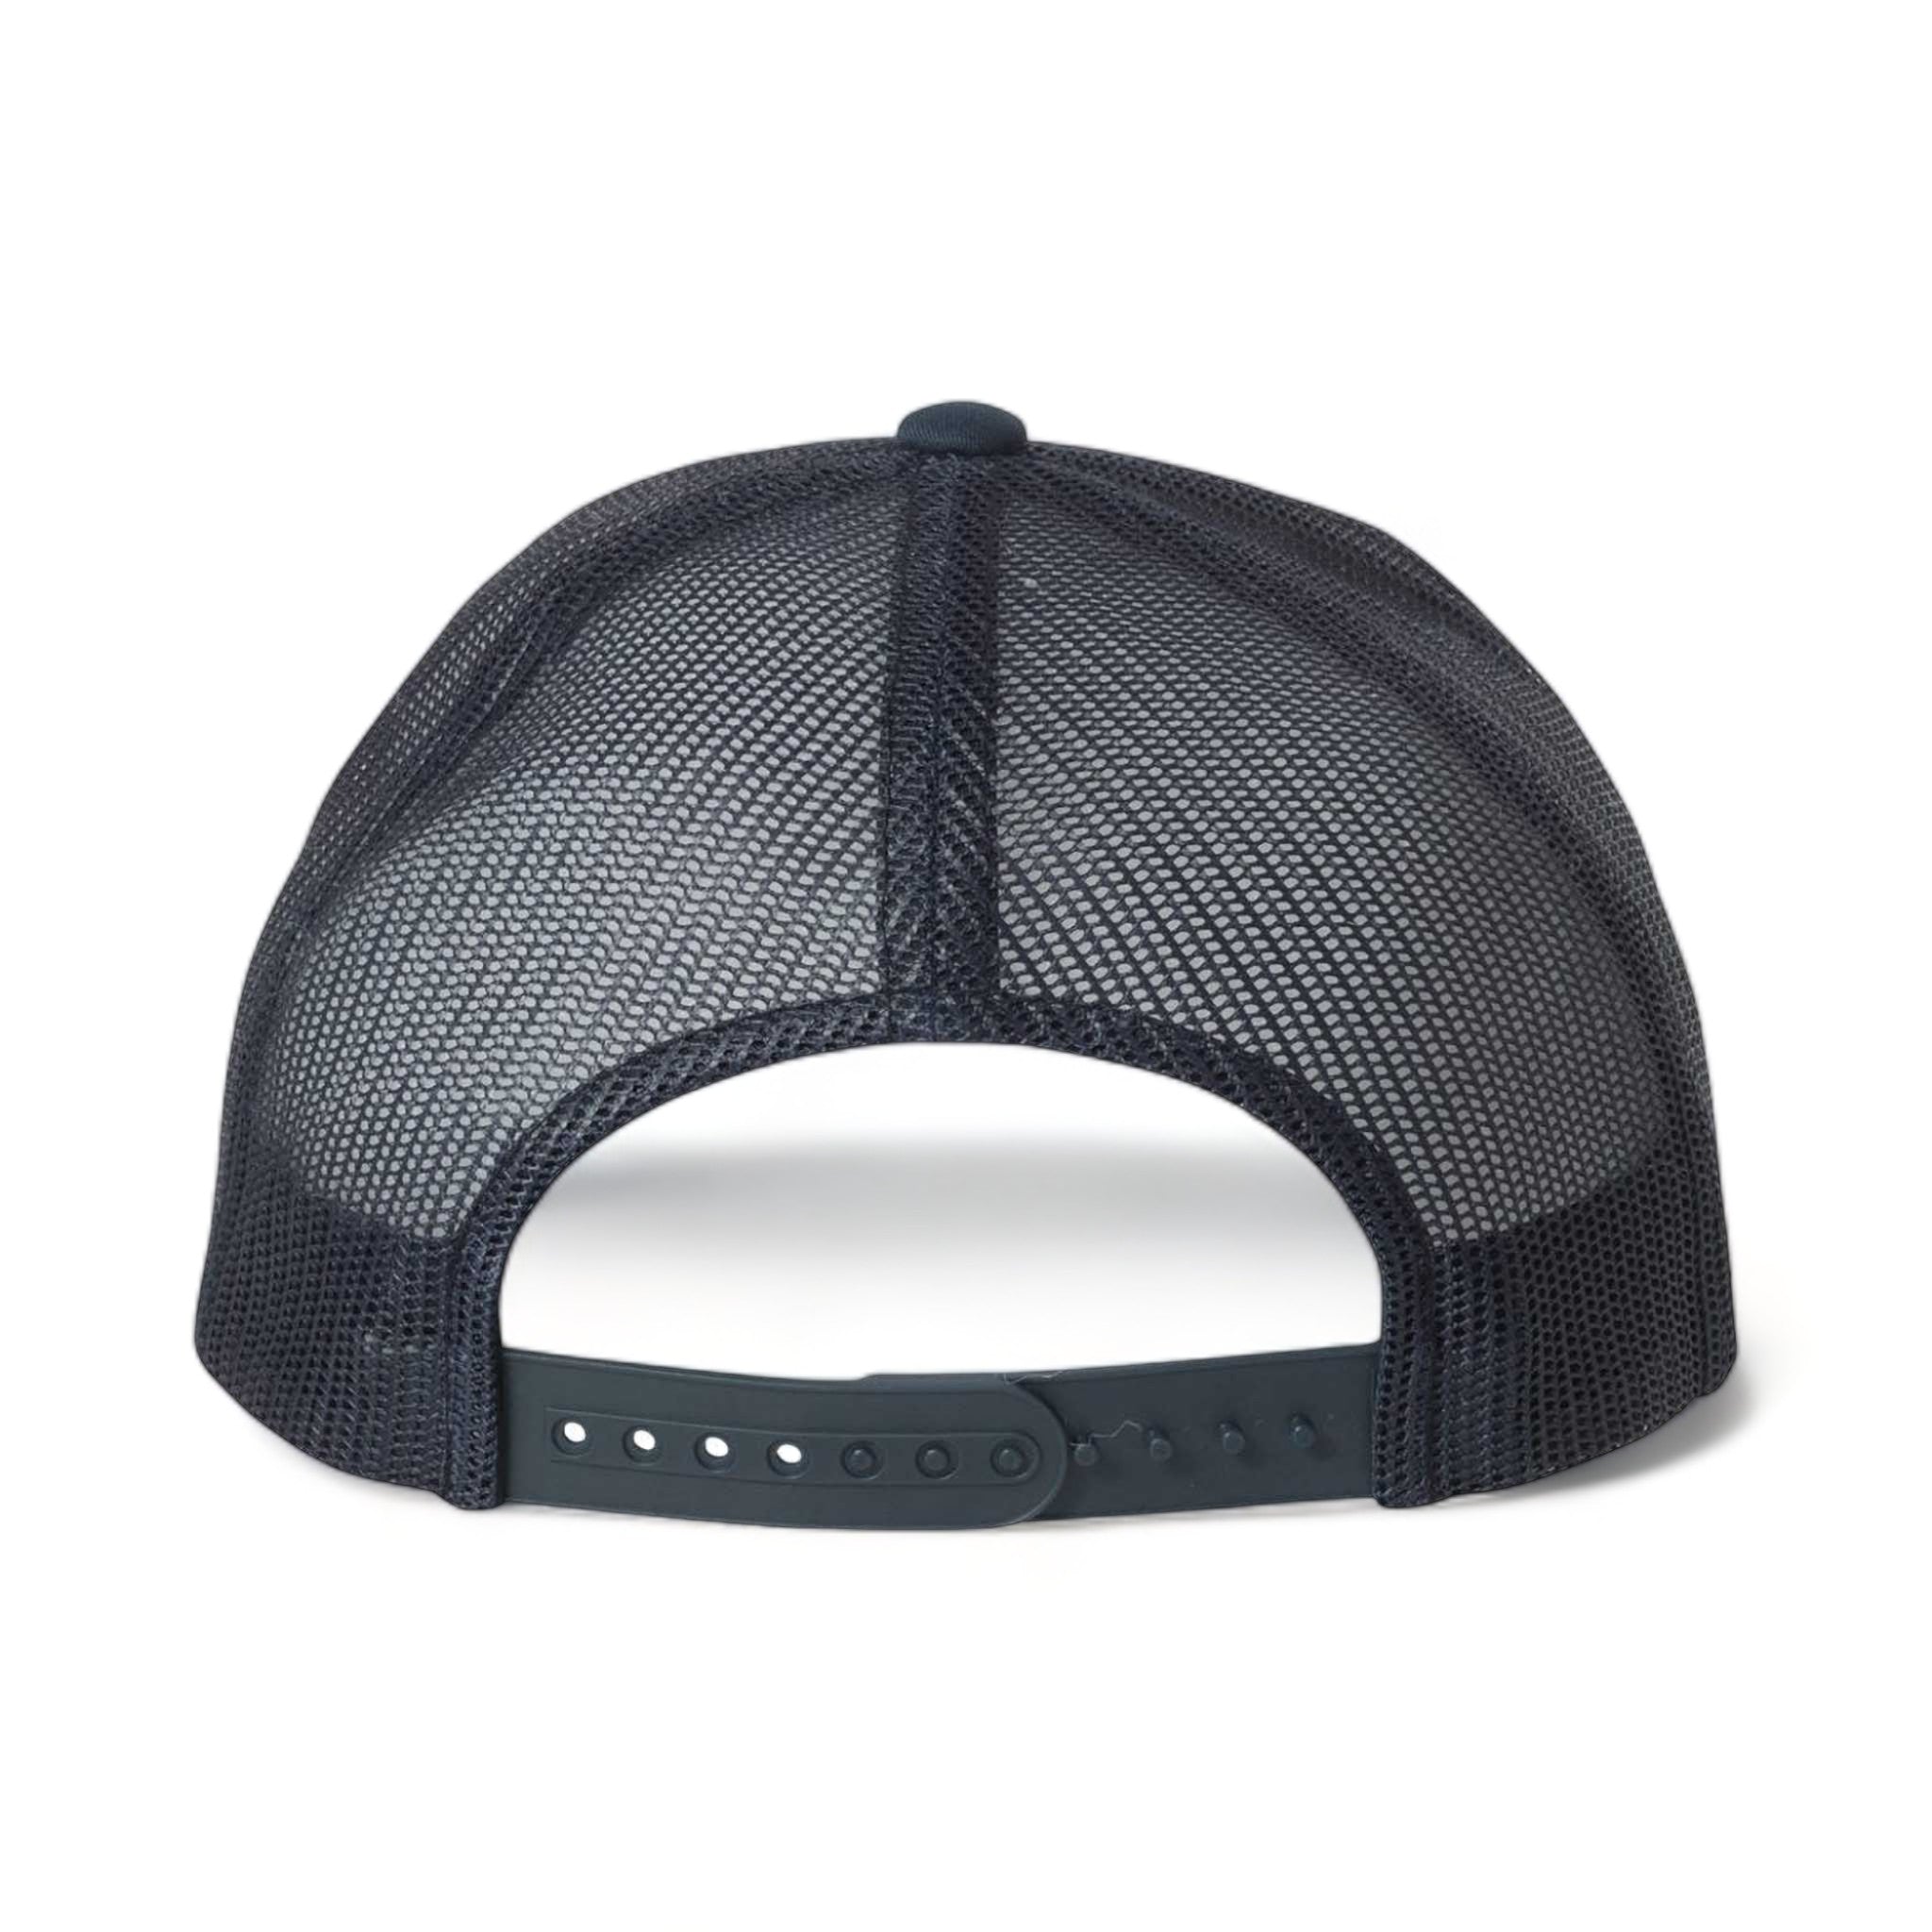 Back view of YP Classics 6606 custom hat in navy